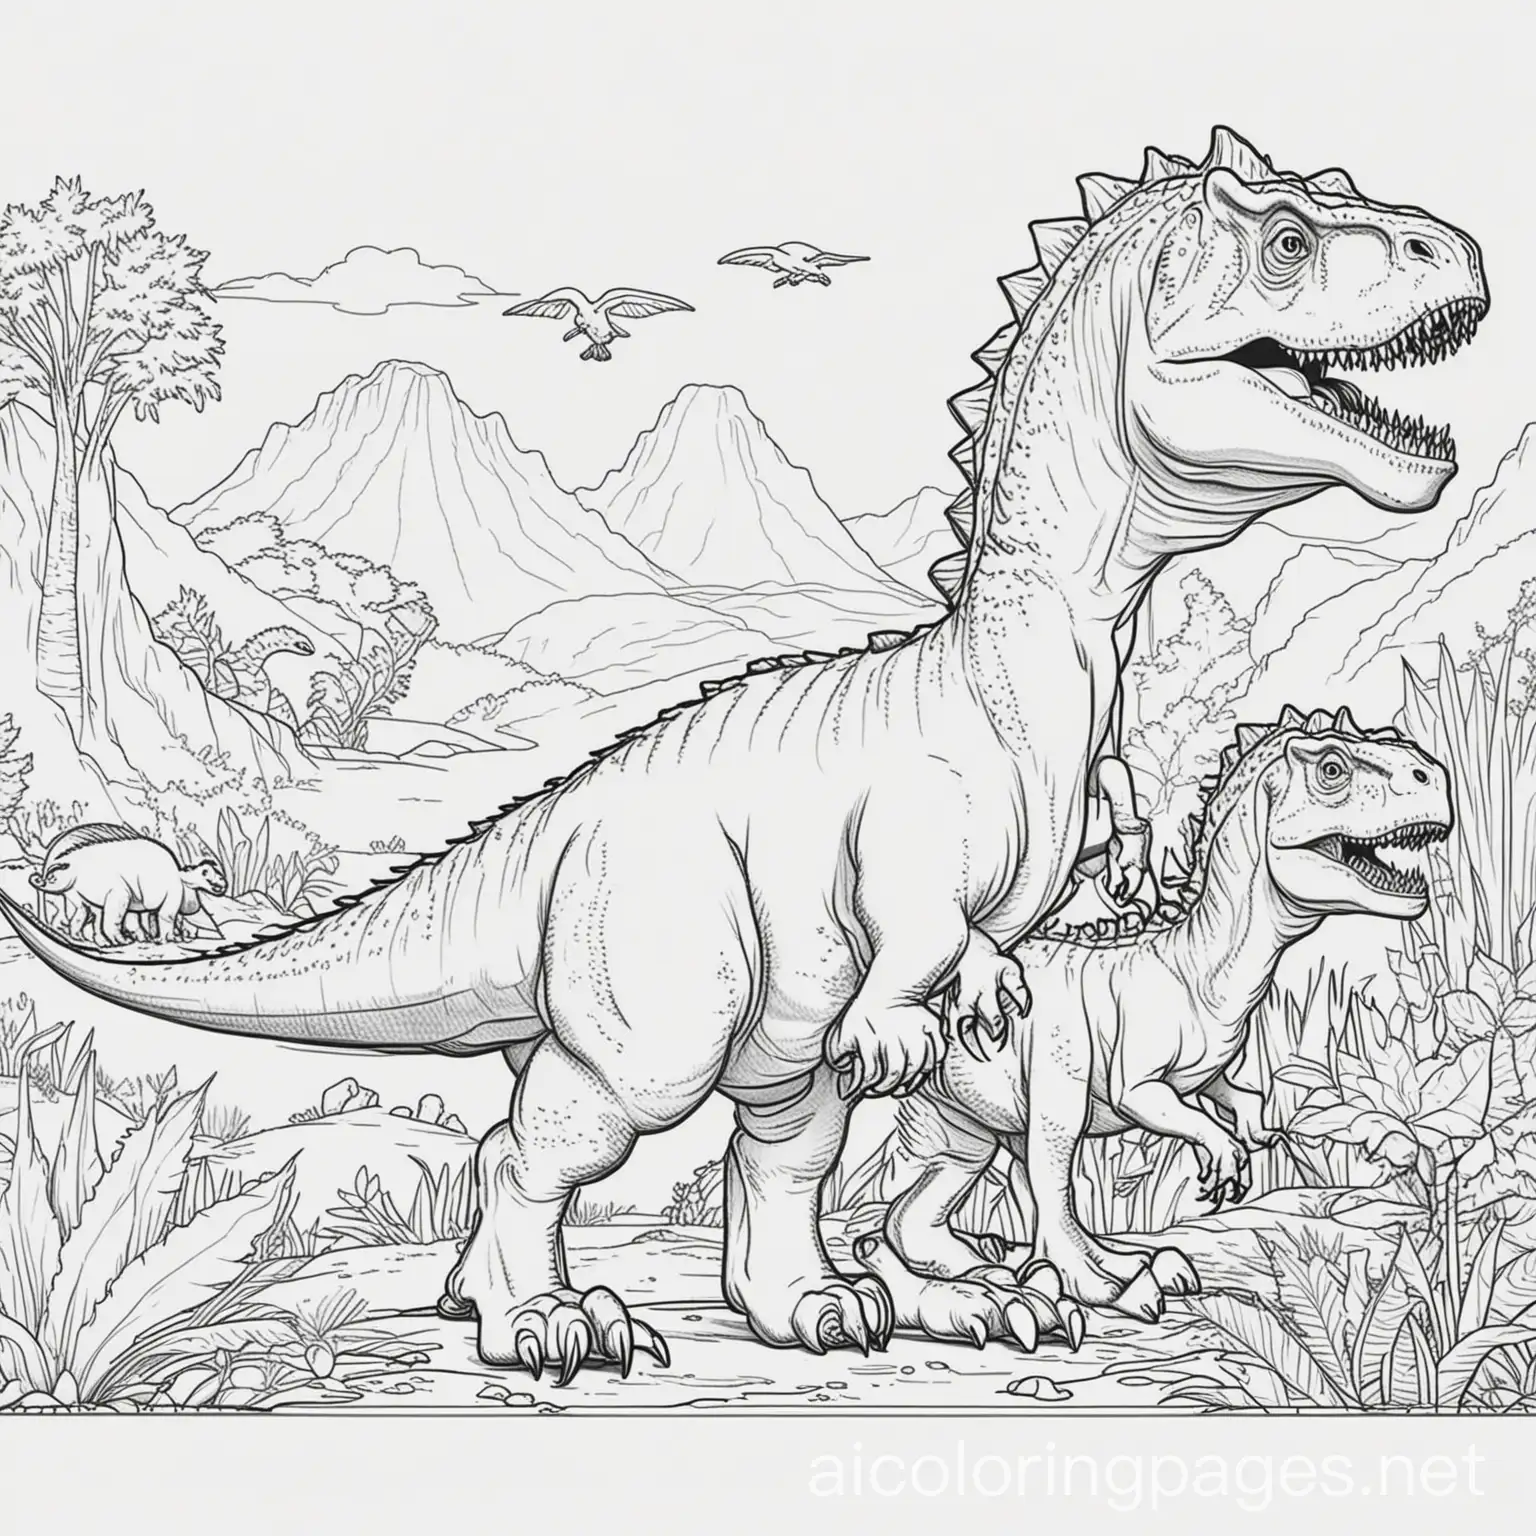 dinosaurs, Coloring Page, black and white, line art, white background, Simplicity, Ample White Space. The background of the coloring page is plain white to make it easy for young children to color within the lines. The outlines of all the subjects are easy to distinguish, making it simple for kids to color without too much difficulty